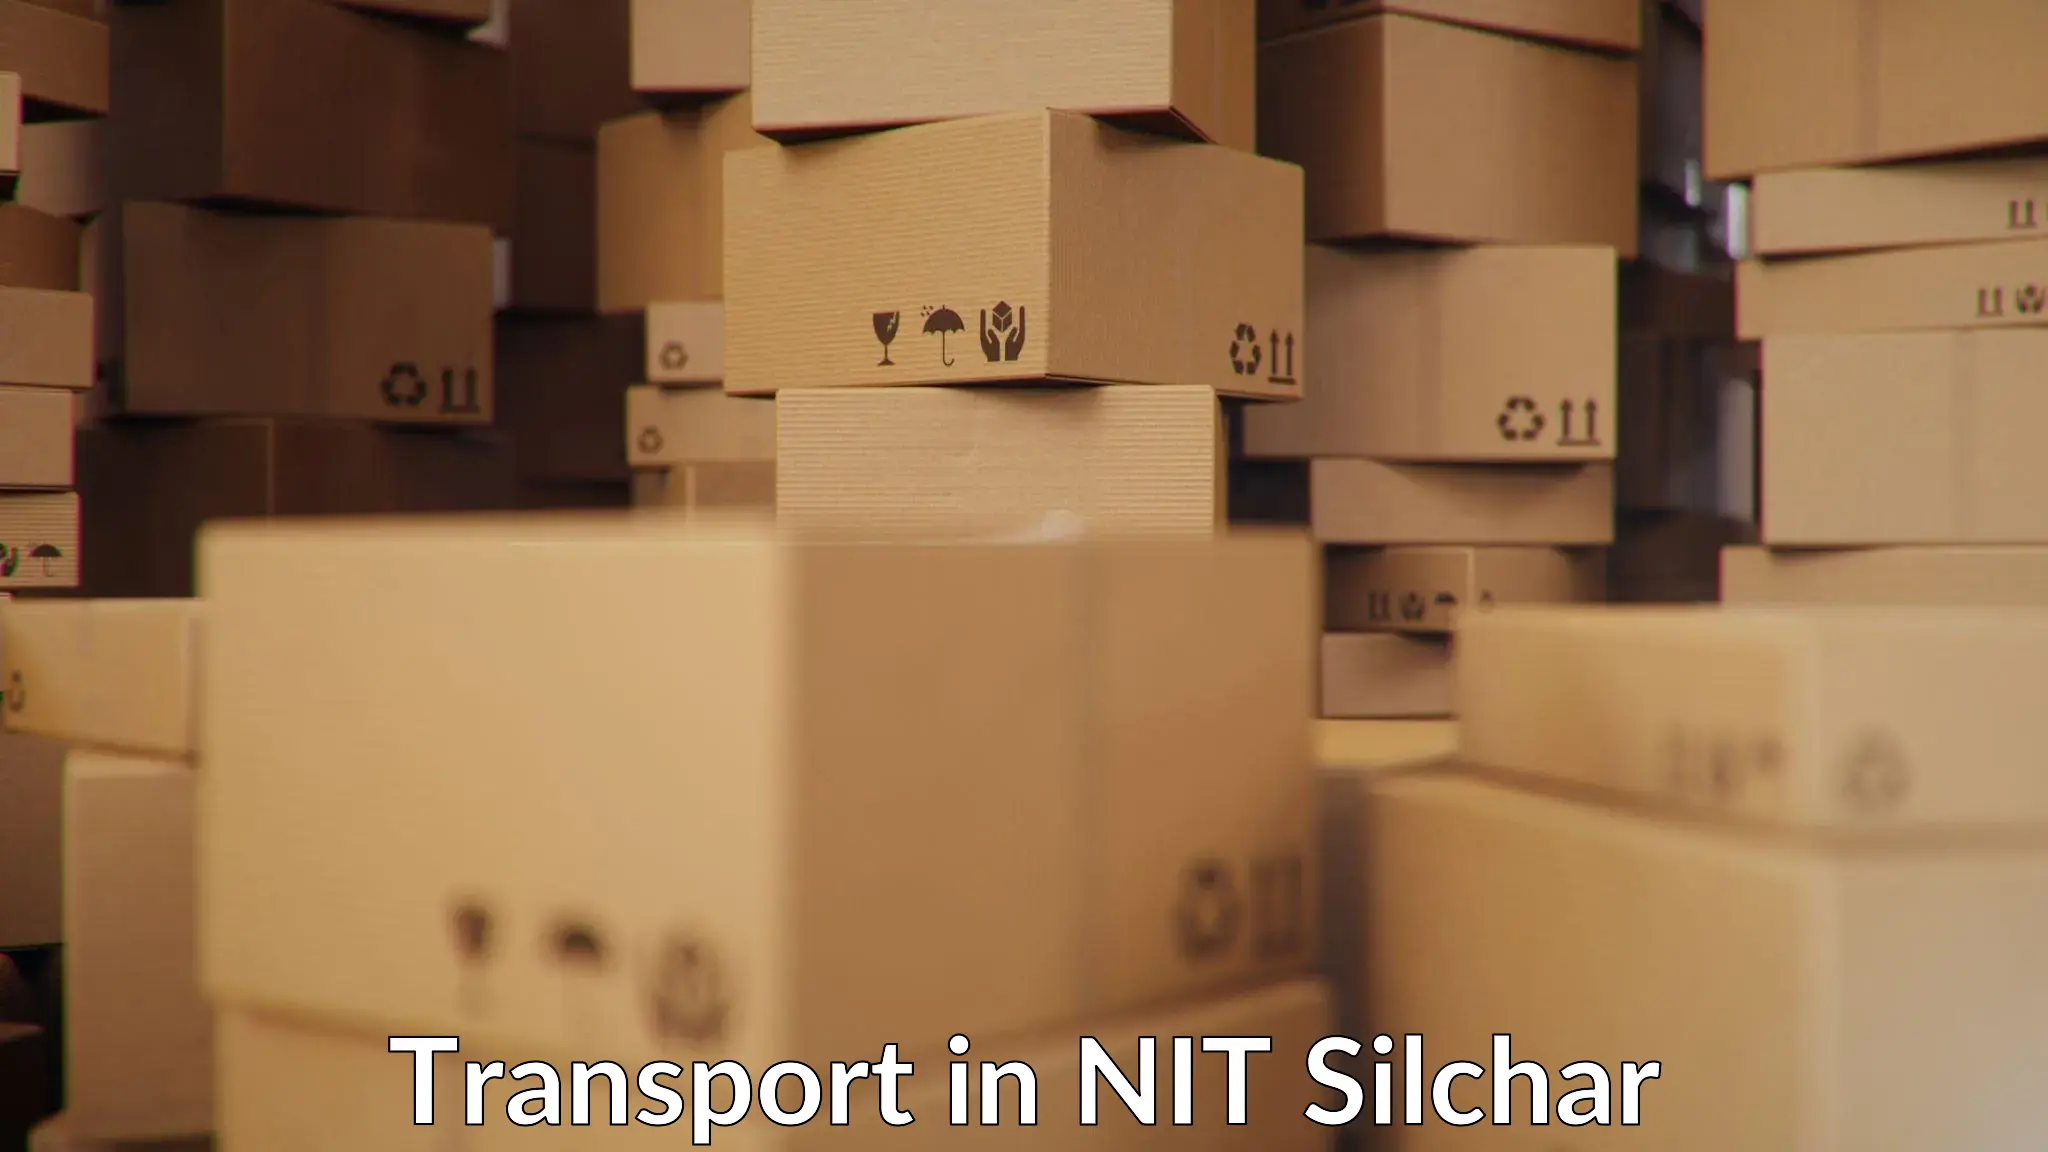 Daily parcel service transport in NIT Silchar